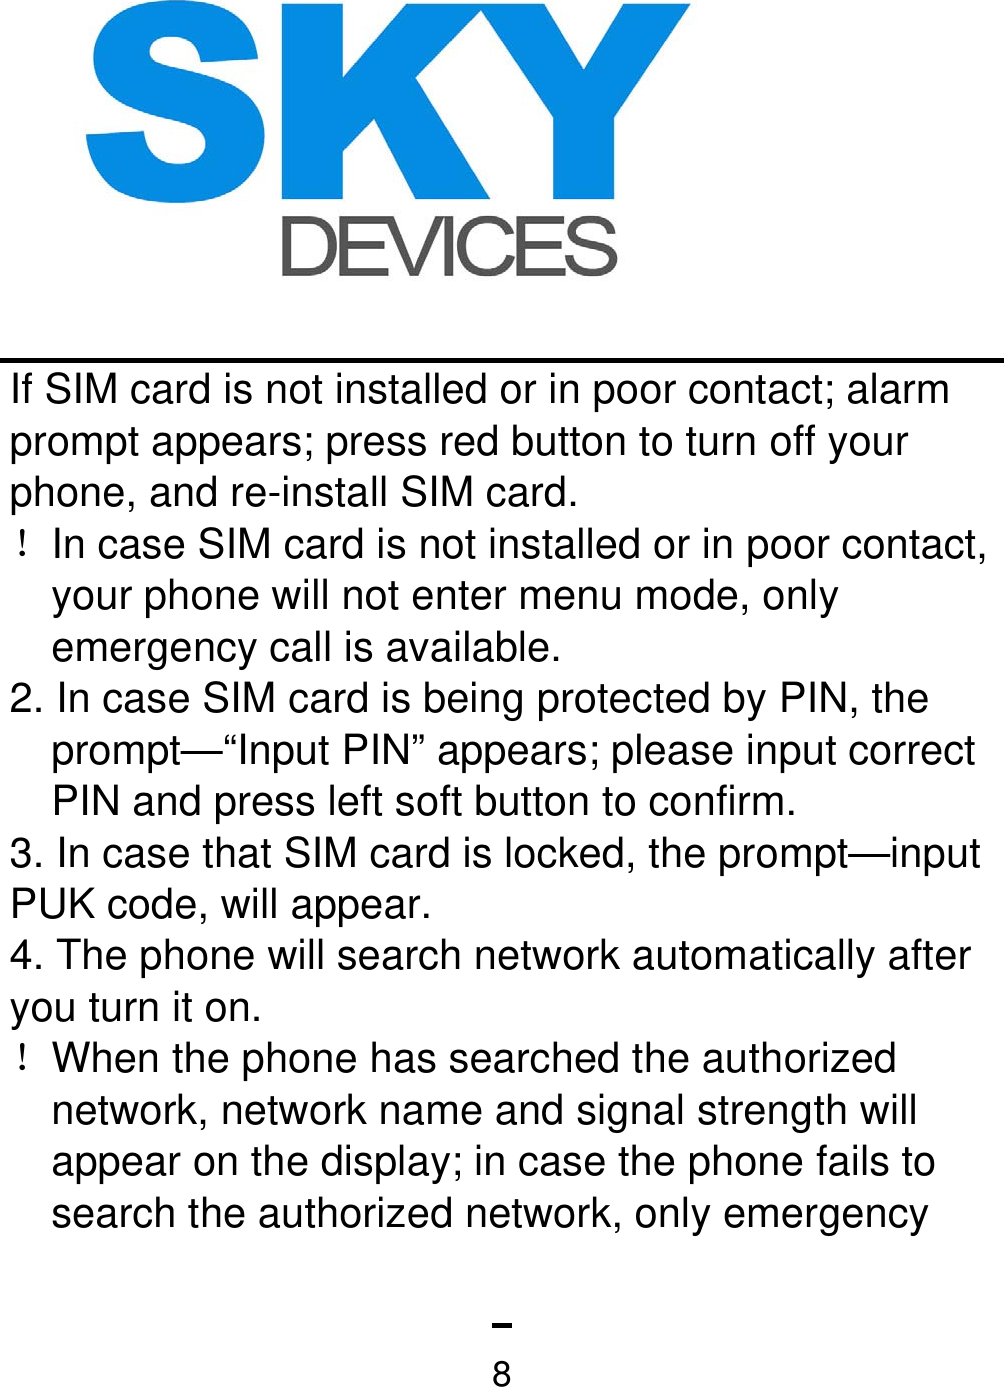   8If SIM card is not installed or in poor contact; alarm prompt appears; press red button to turn off your phone, and re-install SIM card. ！In case SIM card is not installed or in poor contact, your phone will not enter menu mode, only emergency call is available. 2. In case SIM card is being protected by PIN, the prompt—“Input PIN” appears; please input correct PIN and press left soft button to confirm. 3. In case that SIM card is locked, the prompt—input PUK code, will appear. 4. The phone will search network automatically after you turn it on. ！When the phone has searched the authorized network, network name and signal strength will appear on the display; in case the phone fails to search the authorized network, only emergency 